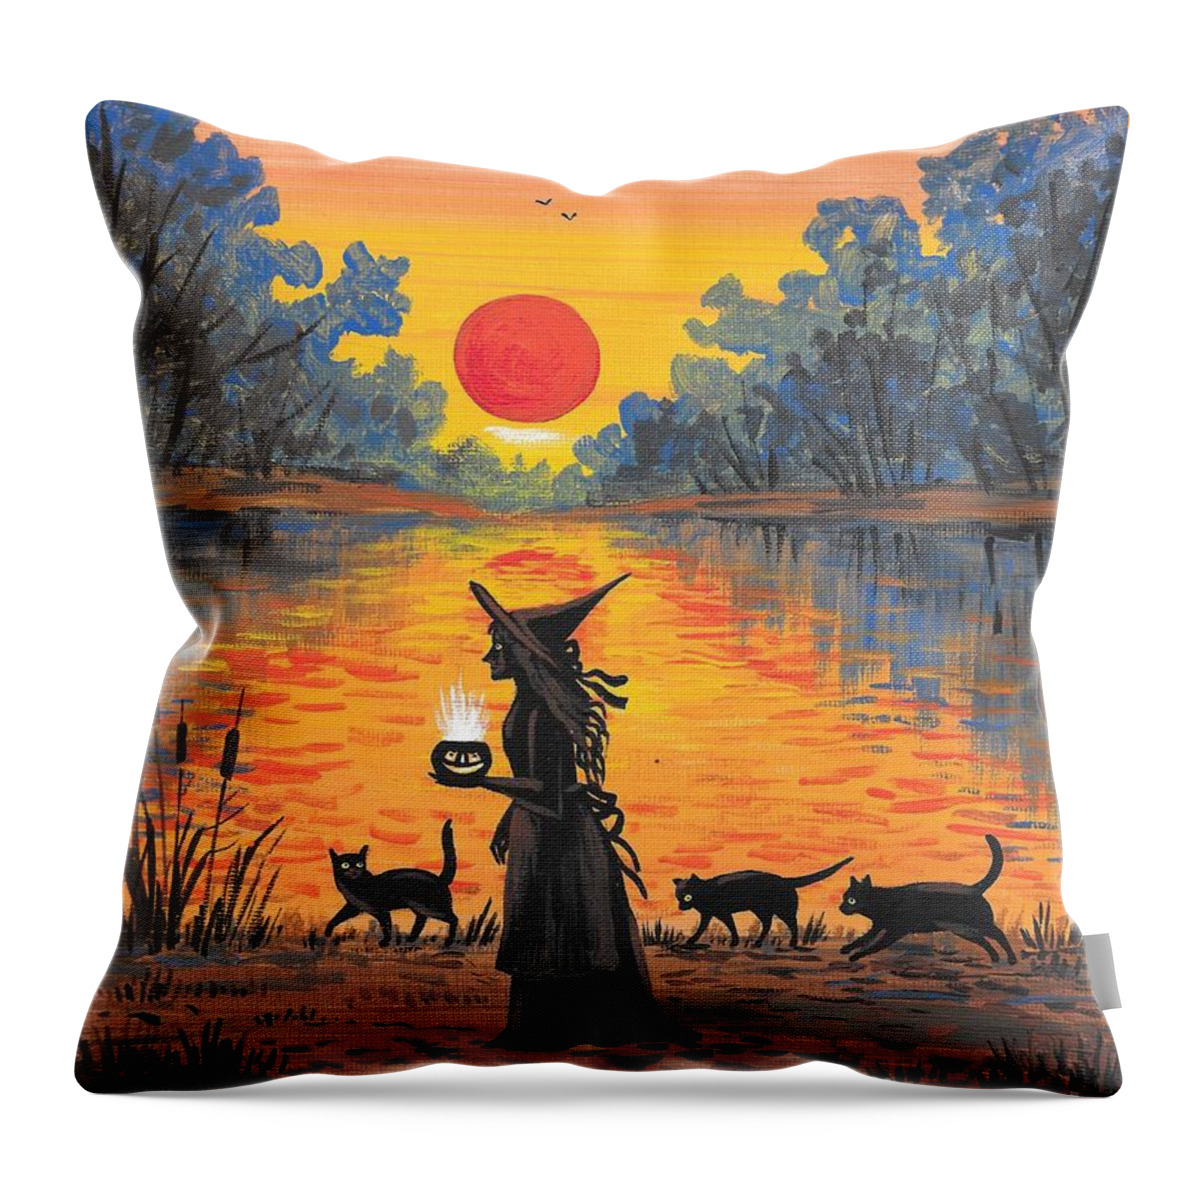 Print Throw Pillow featuring the painting Magic Of The Sunset by Margaryta Yermolayeva